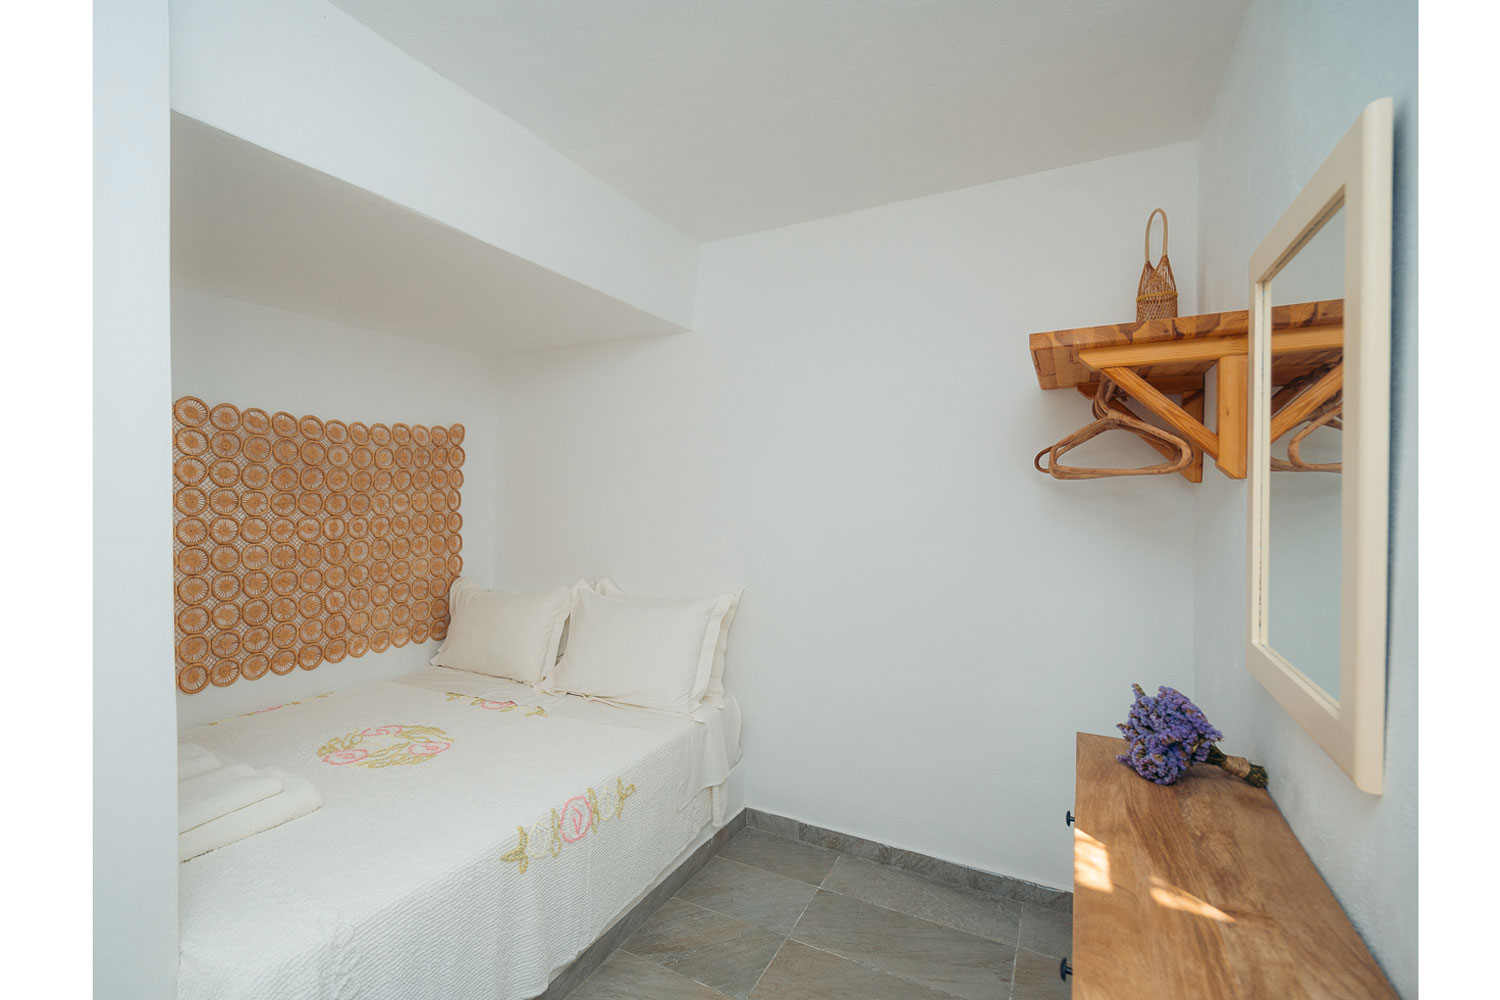 Bedroom with double bed at Elia family house at Sifnos